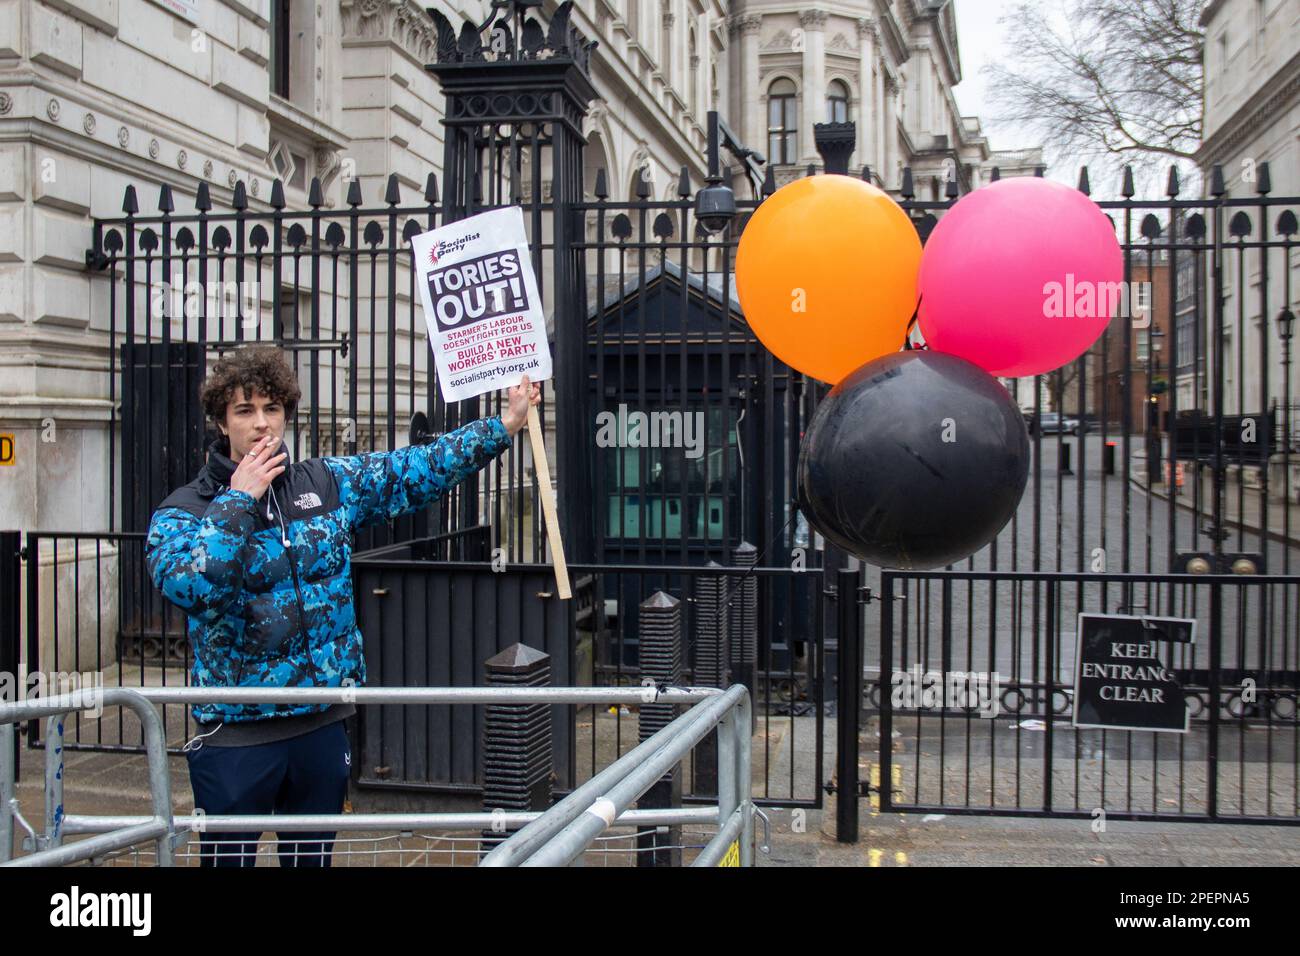 London, UK. 15th Mar, 2023. London, UK - March 15, 2023: On Budget Day, amid a 24-hour general strike involving numerous unions and workers, a socialist protester stood in front of Downing Street. Credit: Sinai Noor/Alamy Live News Stock Photo